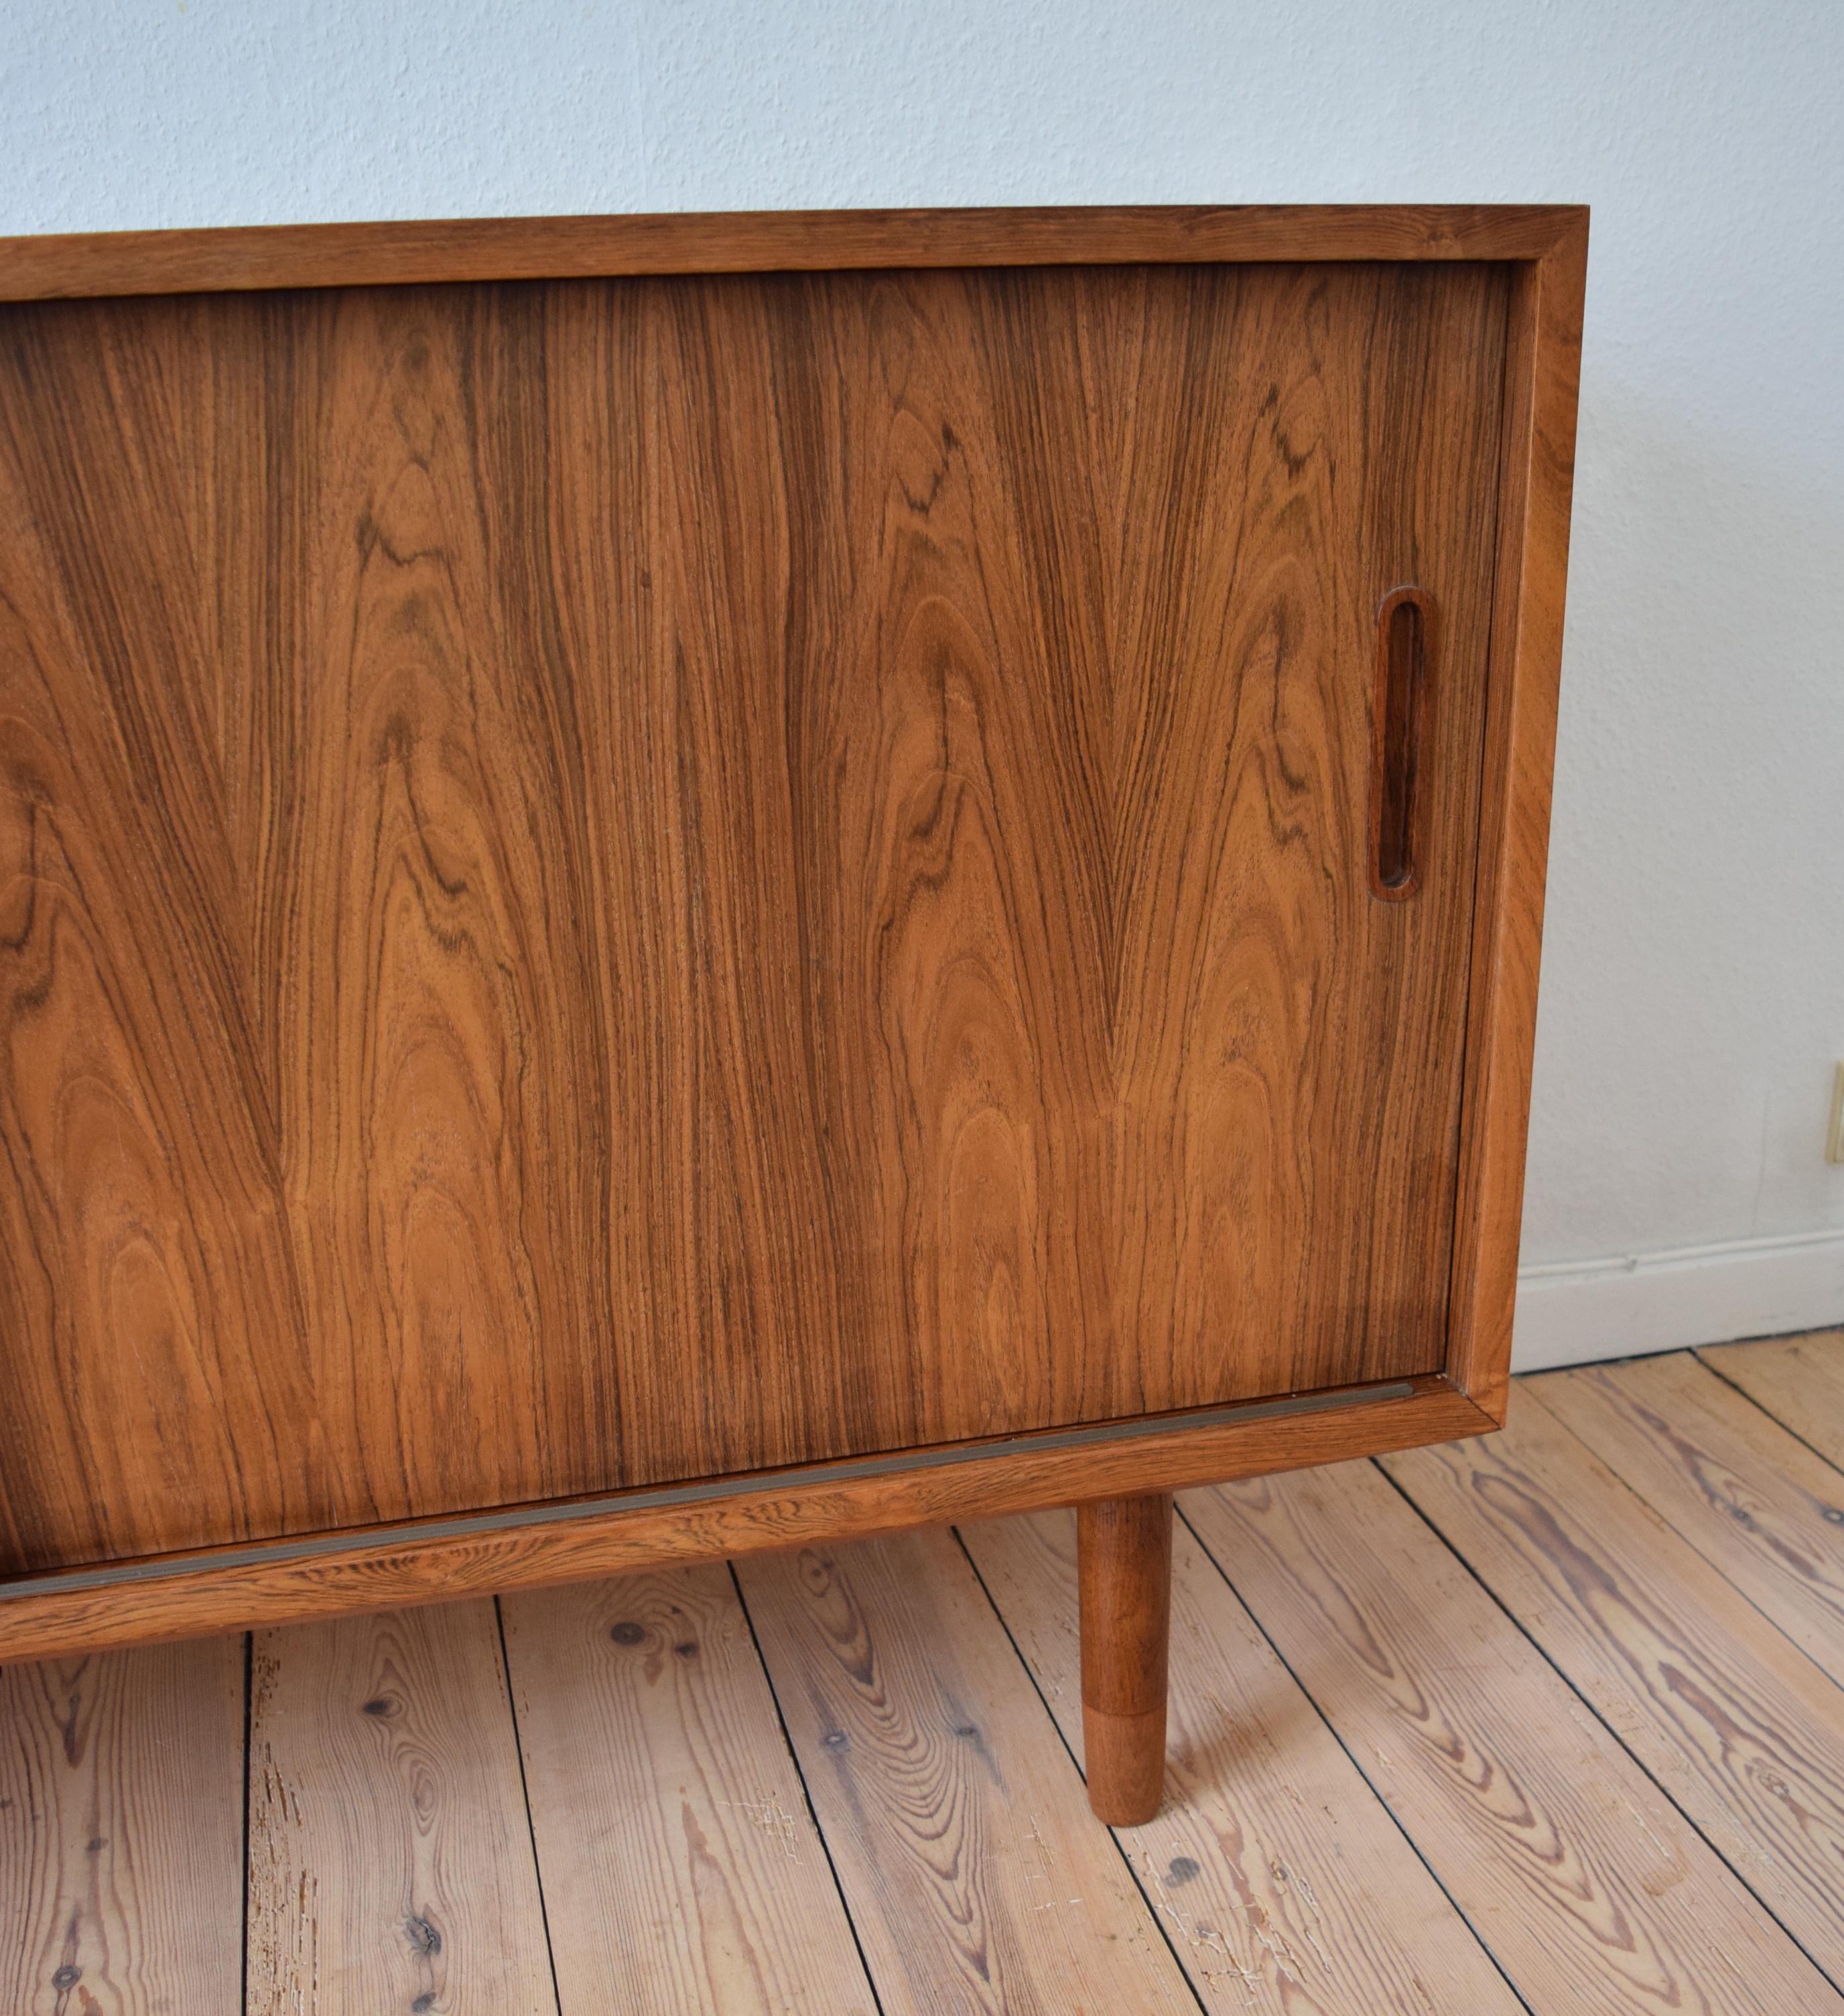 Low rosewood sideboard by Carlo Jensen for Poul Hundevad manufactured in Denmark in the 1960s. This piece features two sliding doors with solid rosewood handles, two felt lined maple drawers and two shelves. Sits on turned and tapered two-tone